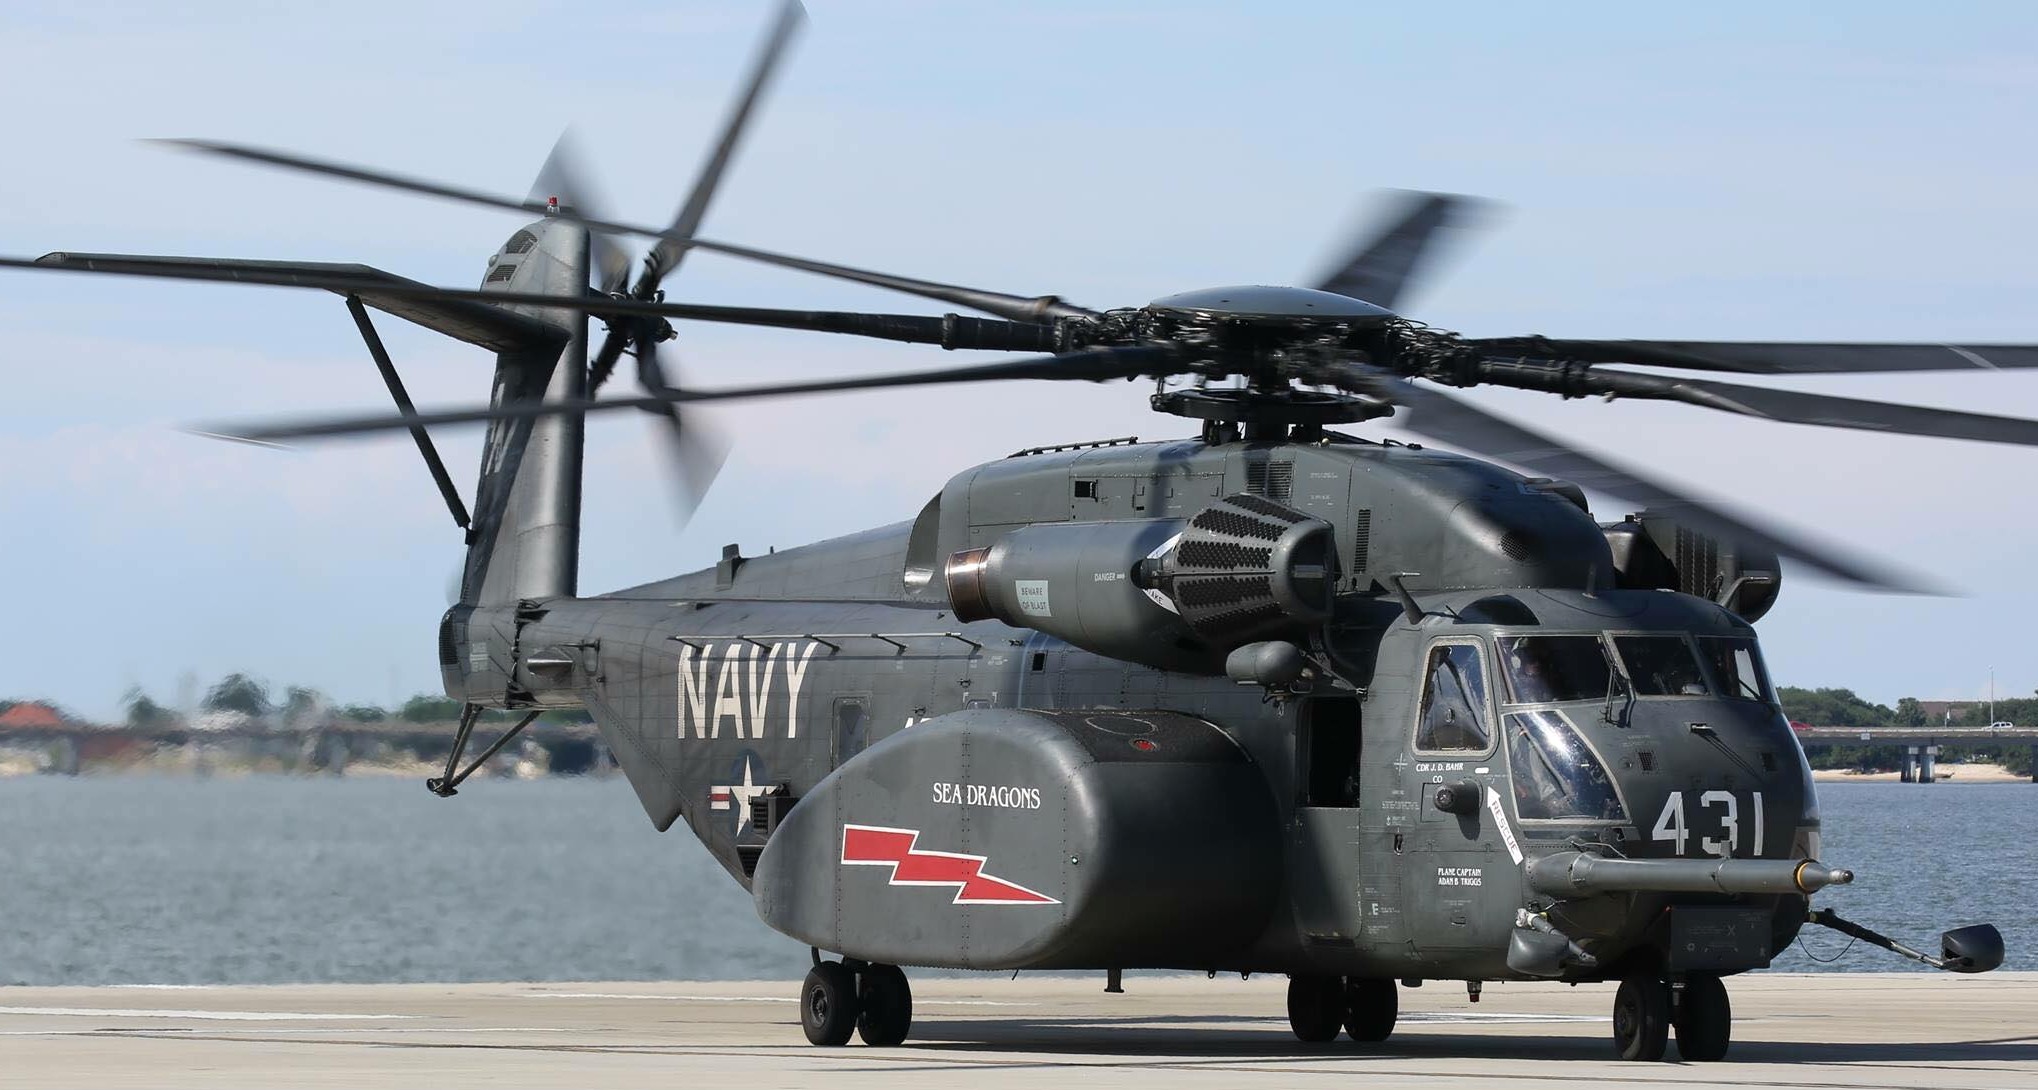 hm-12 sea dragons helicopter mine countermeasures squadron navy sikorsky mh-53d sea dragon 08x